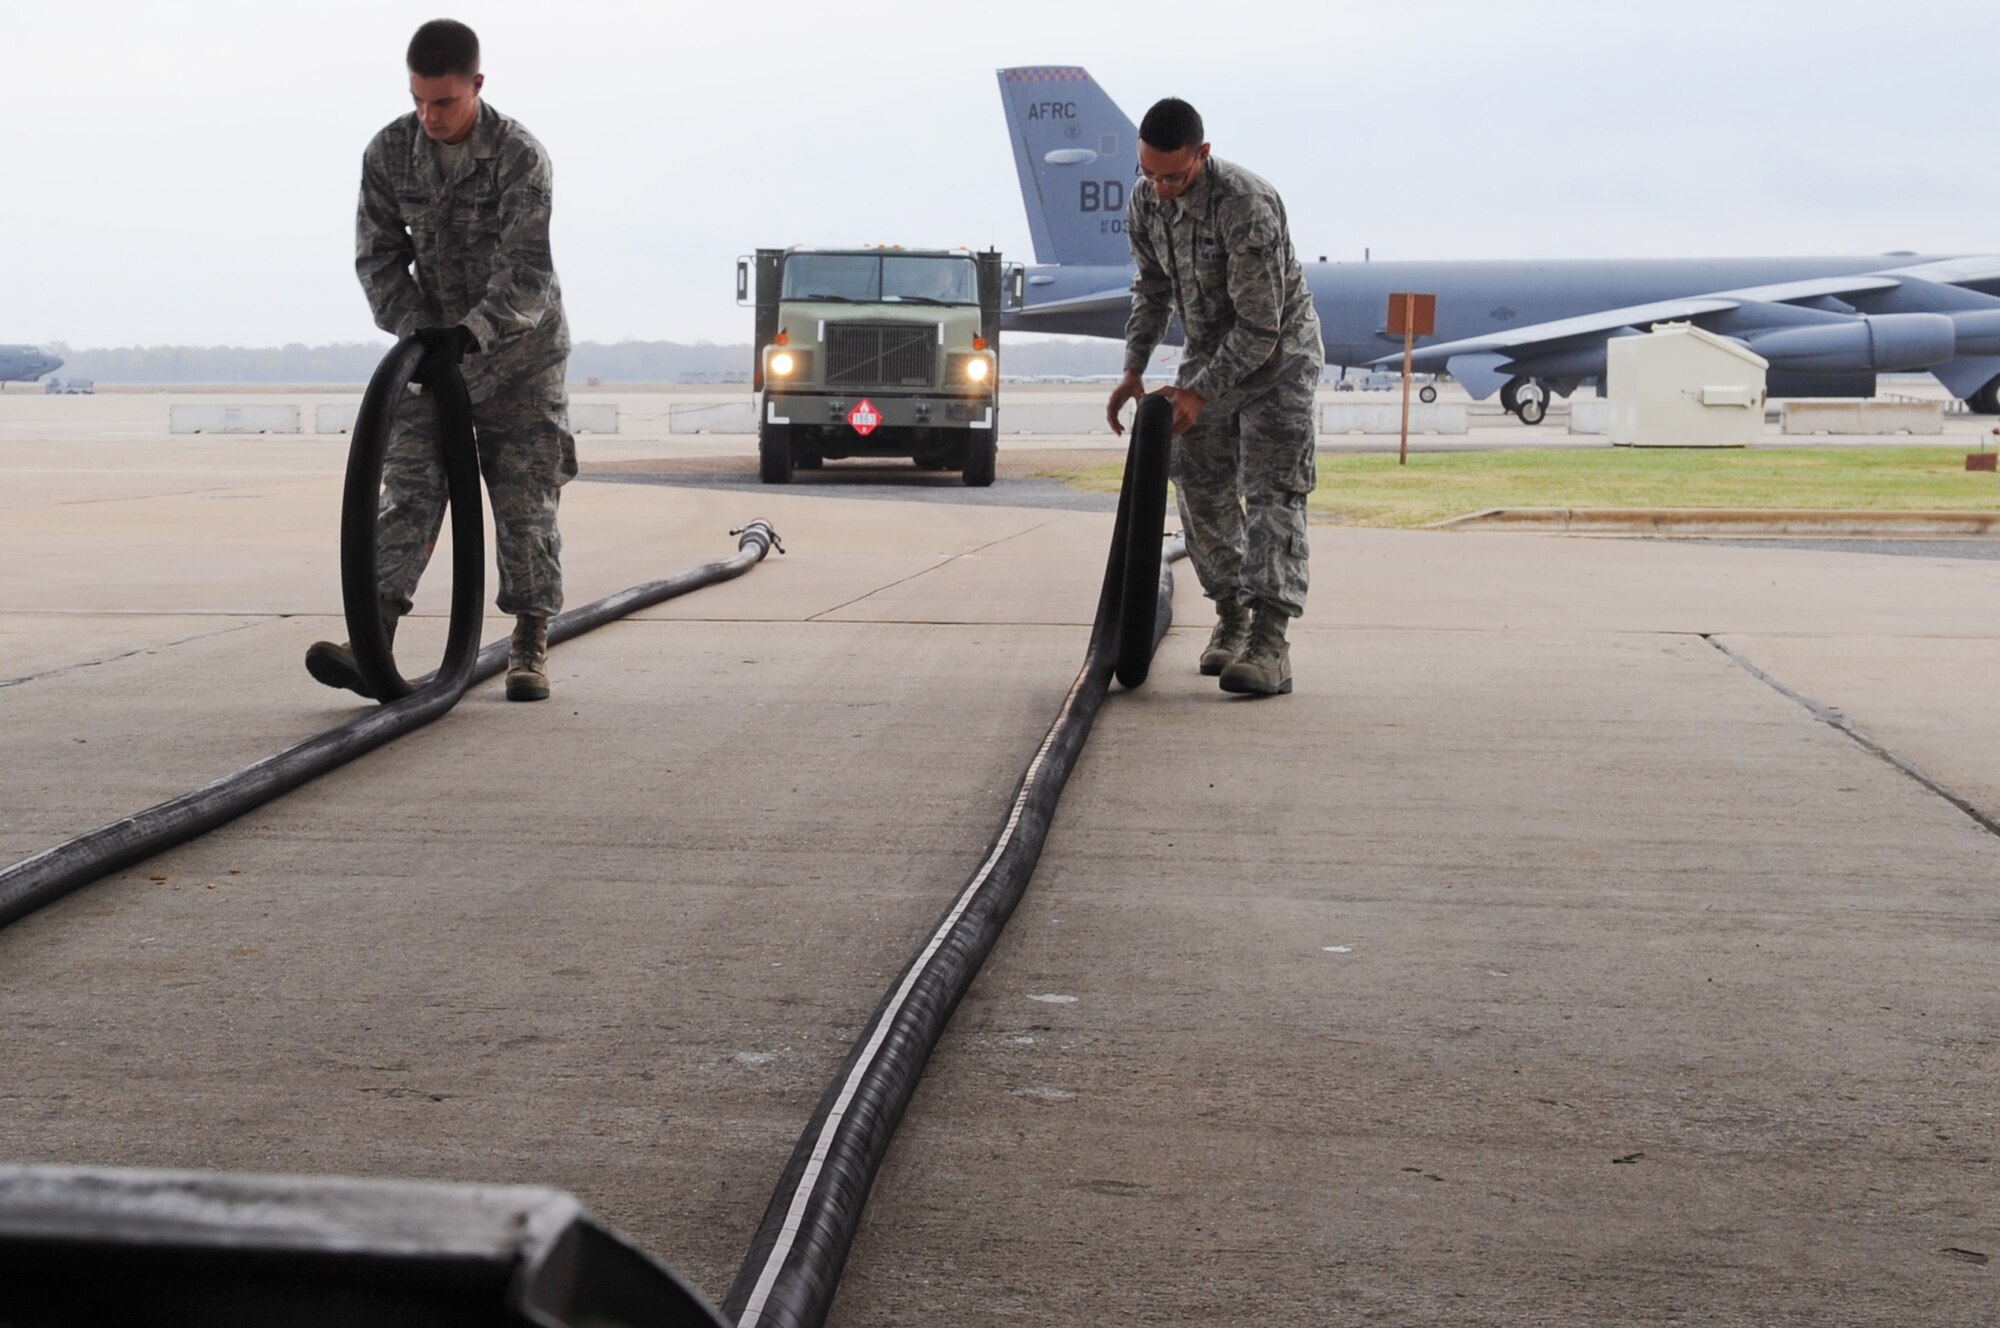 Fuel operators from the 2nd Logistics Readiness Squadron conduct a 140-point inspection on a R-14 fueling truck at Barksdale Air Force Base, La., Nov. 22. The 2 LRS team consists of more than 491 personnel across seven flights consisting of material management, fuels management, readiness, management and systems, traffic management, vehicle management and vehicle operations. (U.S. Air Force photo/Senior Airman Brittany Y. Bateman)(RELEASED)